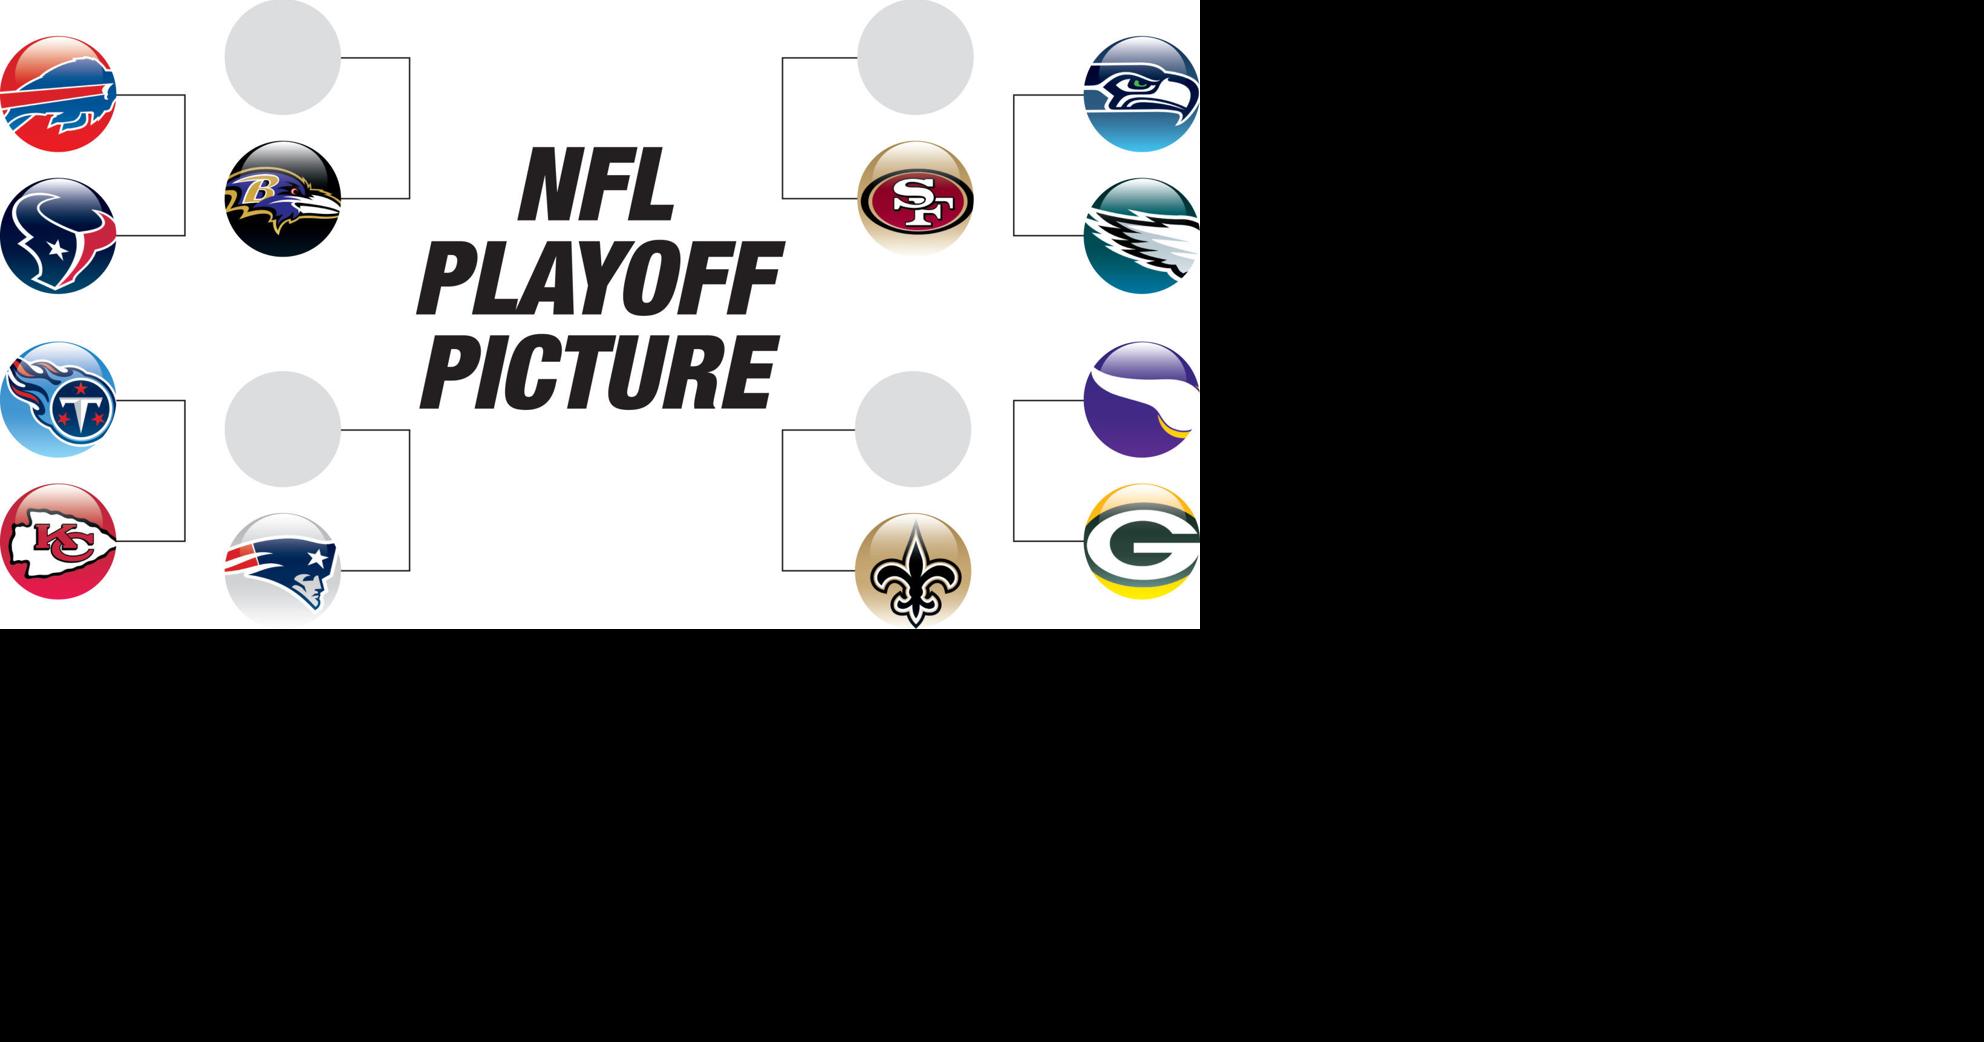 NFL playoffs schedule, bracket and what you need to know - The Washington  Post